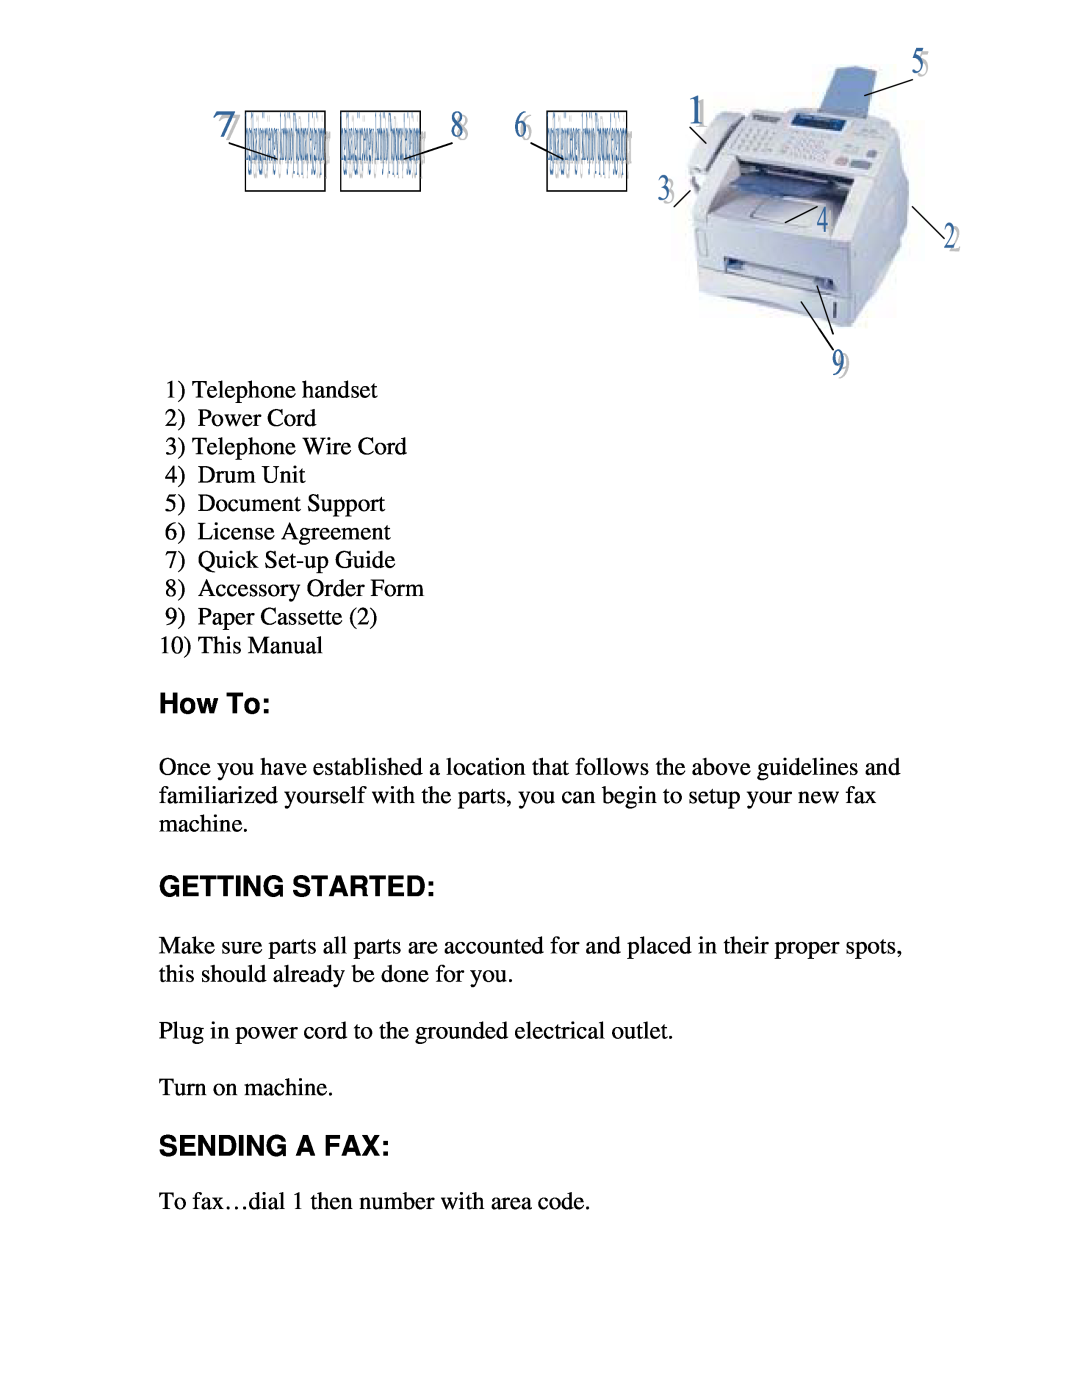 Brother 4100 manual How To, Getting Started, Sending A Fax 